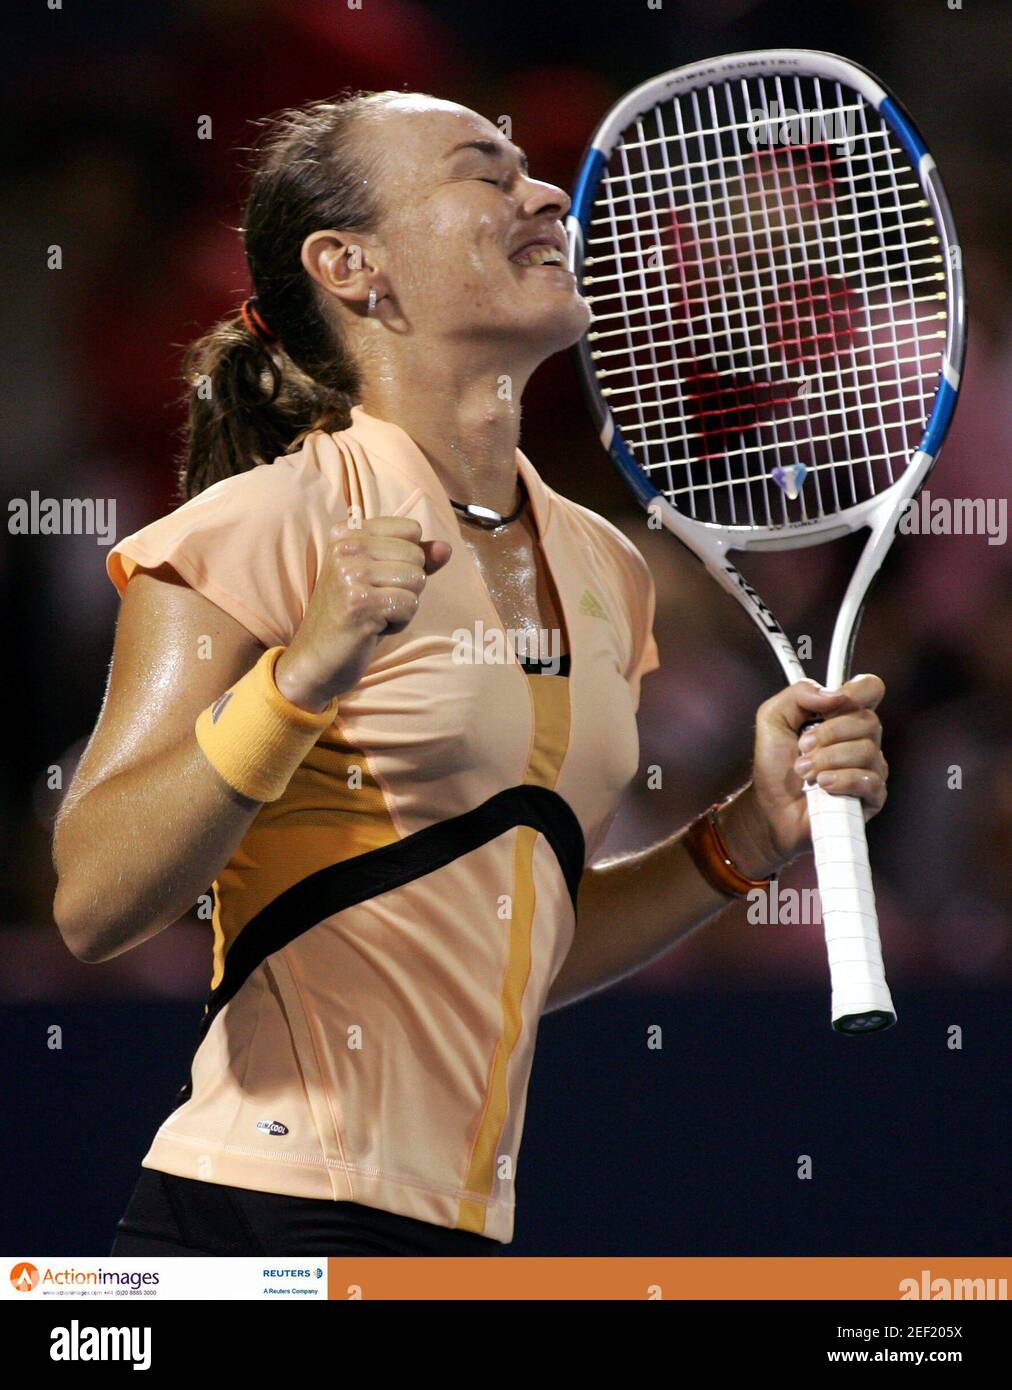 Tennis - Rogers Cup, Sony Ericsson WTA Tour - Montreal, Canada - 15/8/06  Martina Hingis of Switzerland celebrates after defeating Svetlana Kuznetsova of Russia during their quarterfinal match at the Rogers Cup  Mandatory Credit: Action Images / Chris Wattie  Livepic Stock Photo